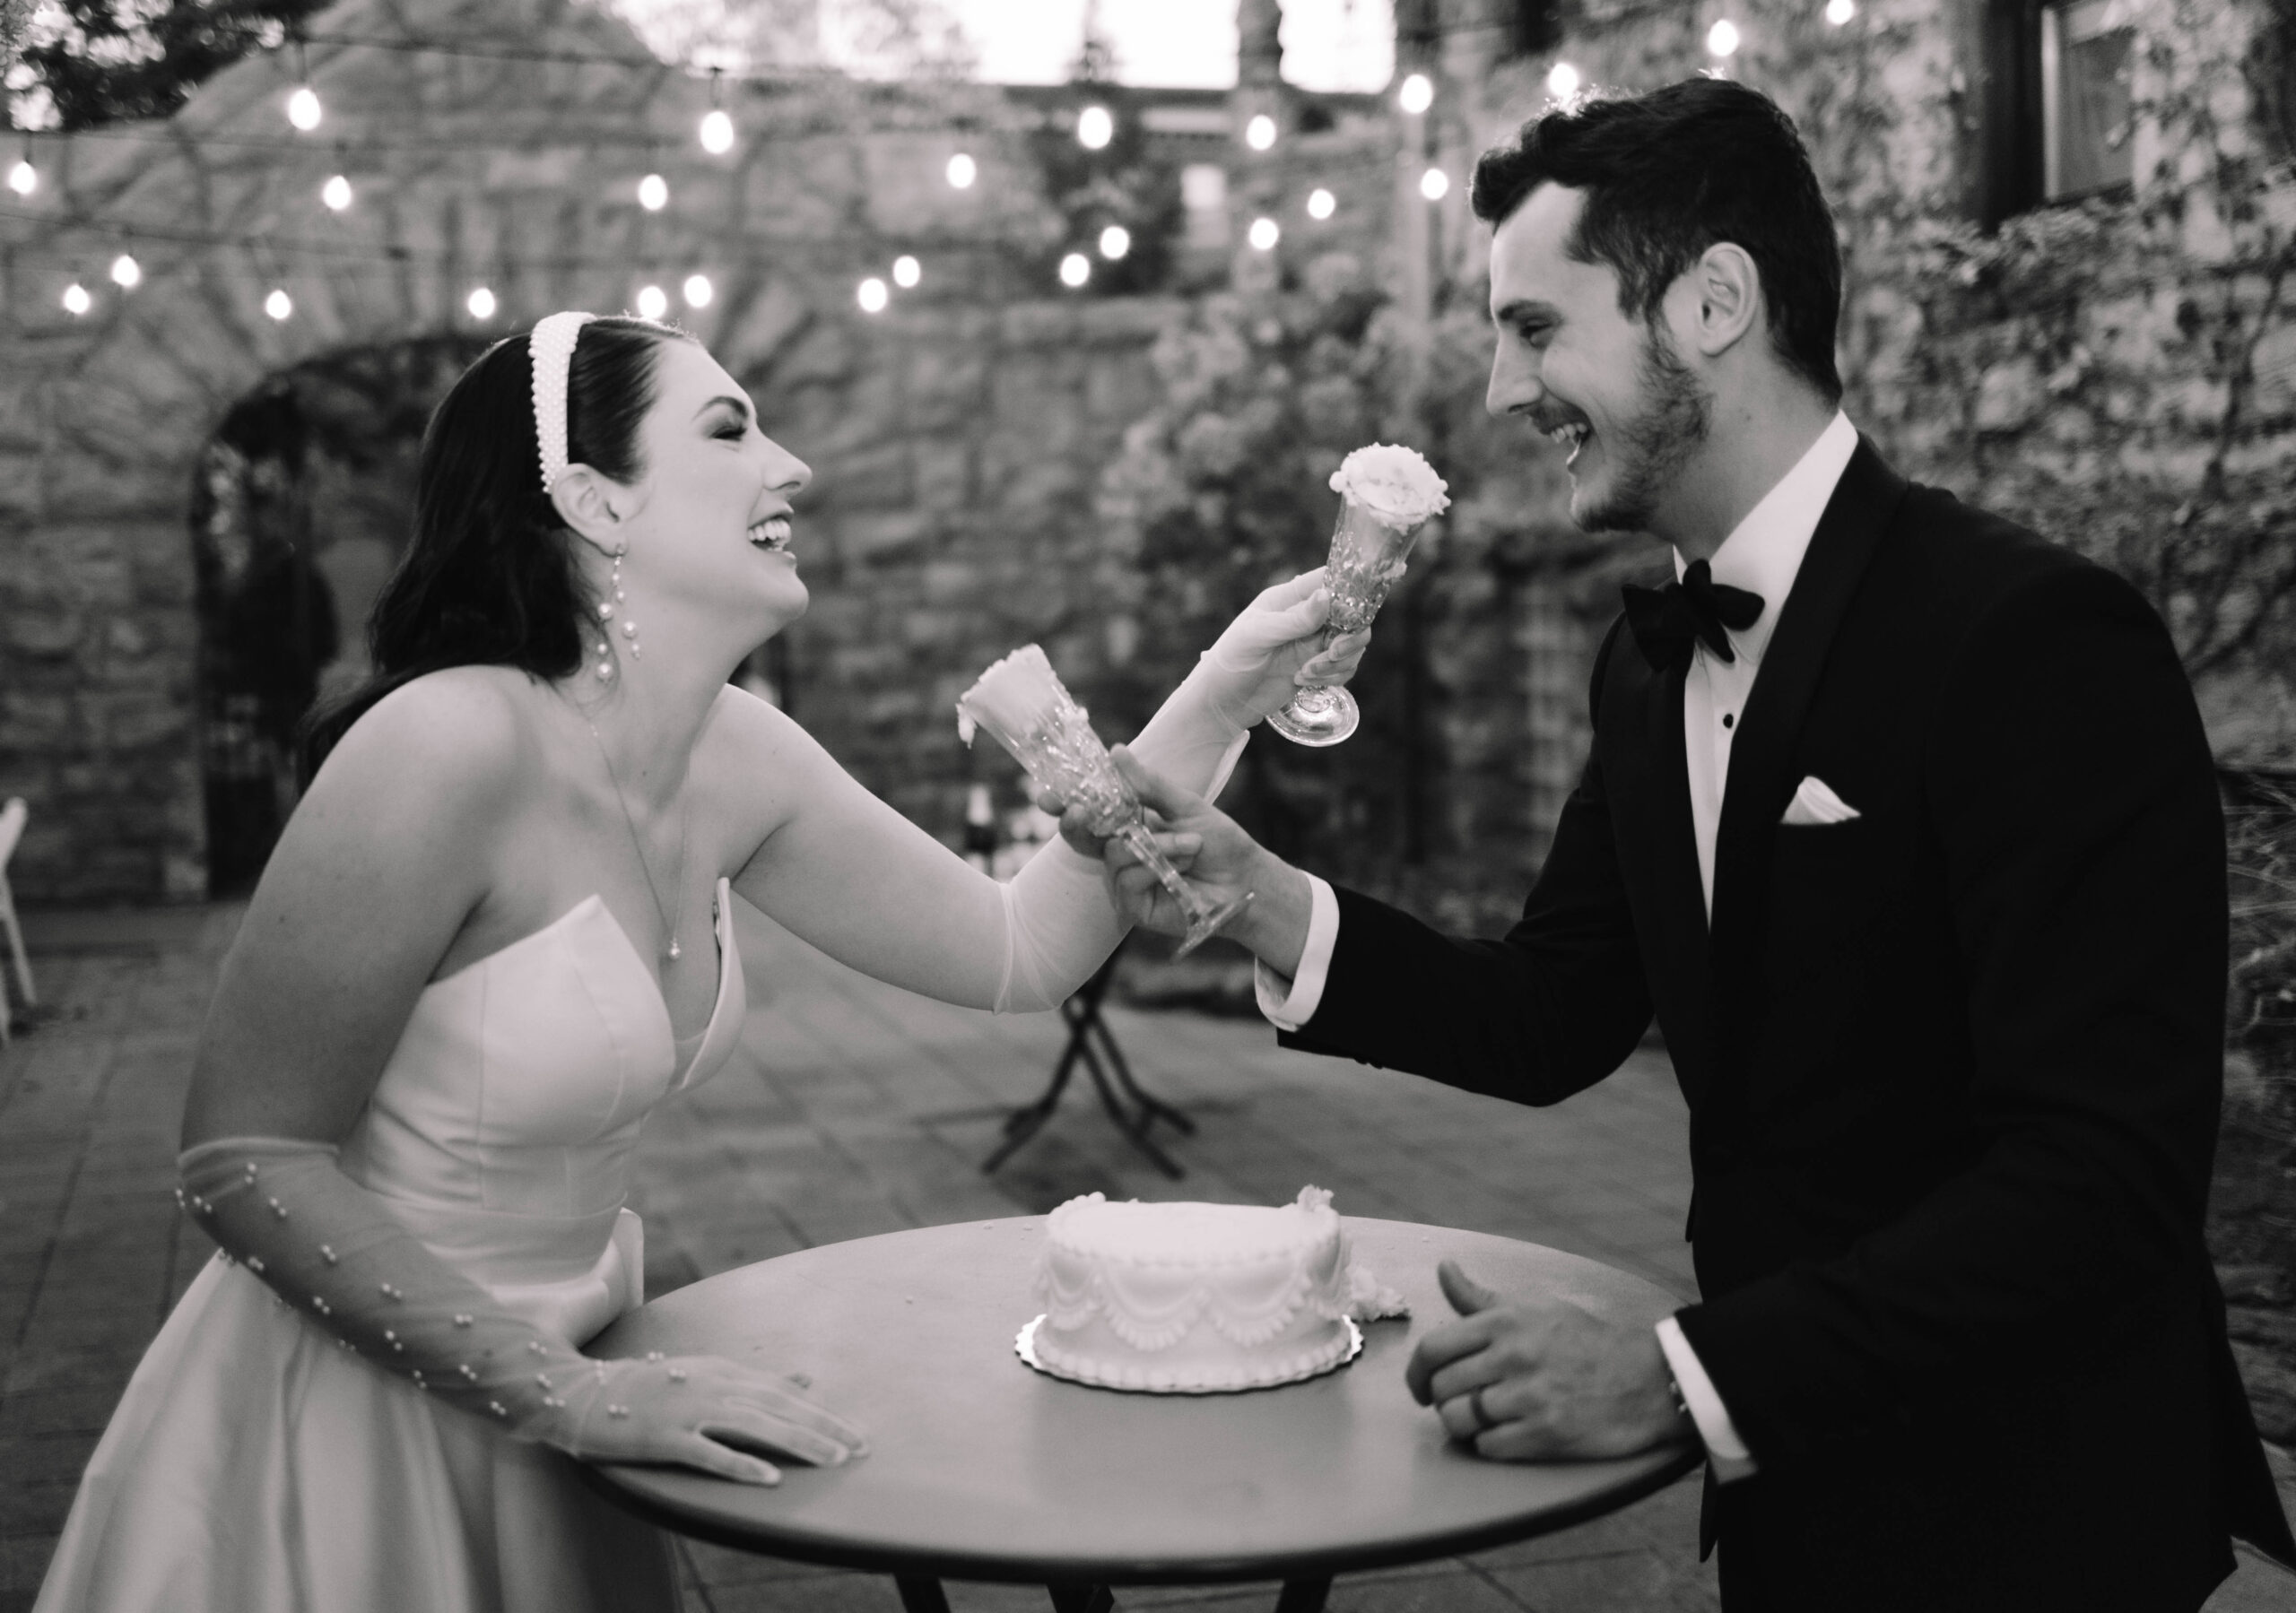 Classic Bride and Groom feeding each other cake and laughing with string lights hanging in the background